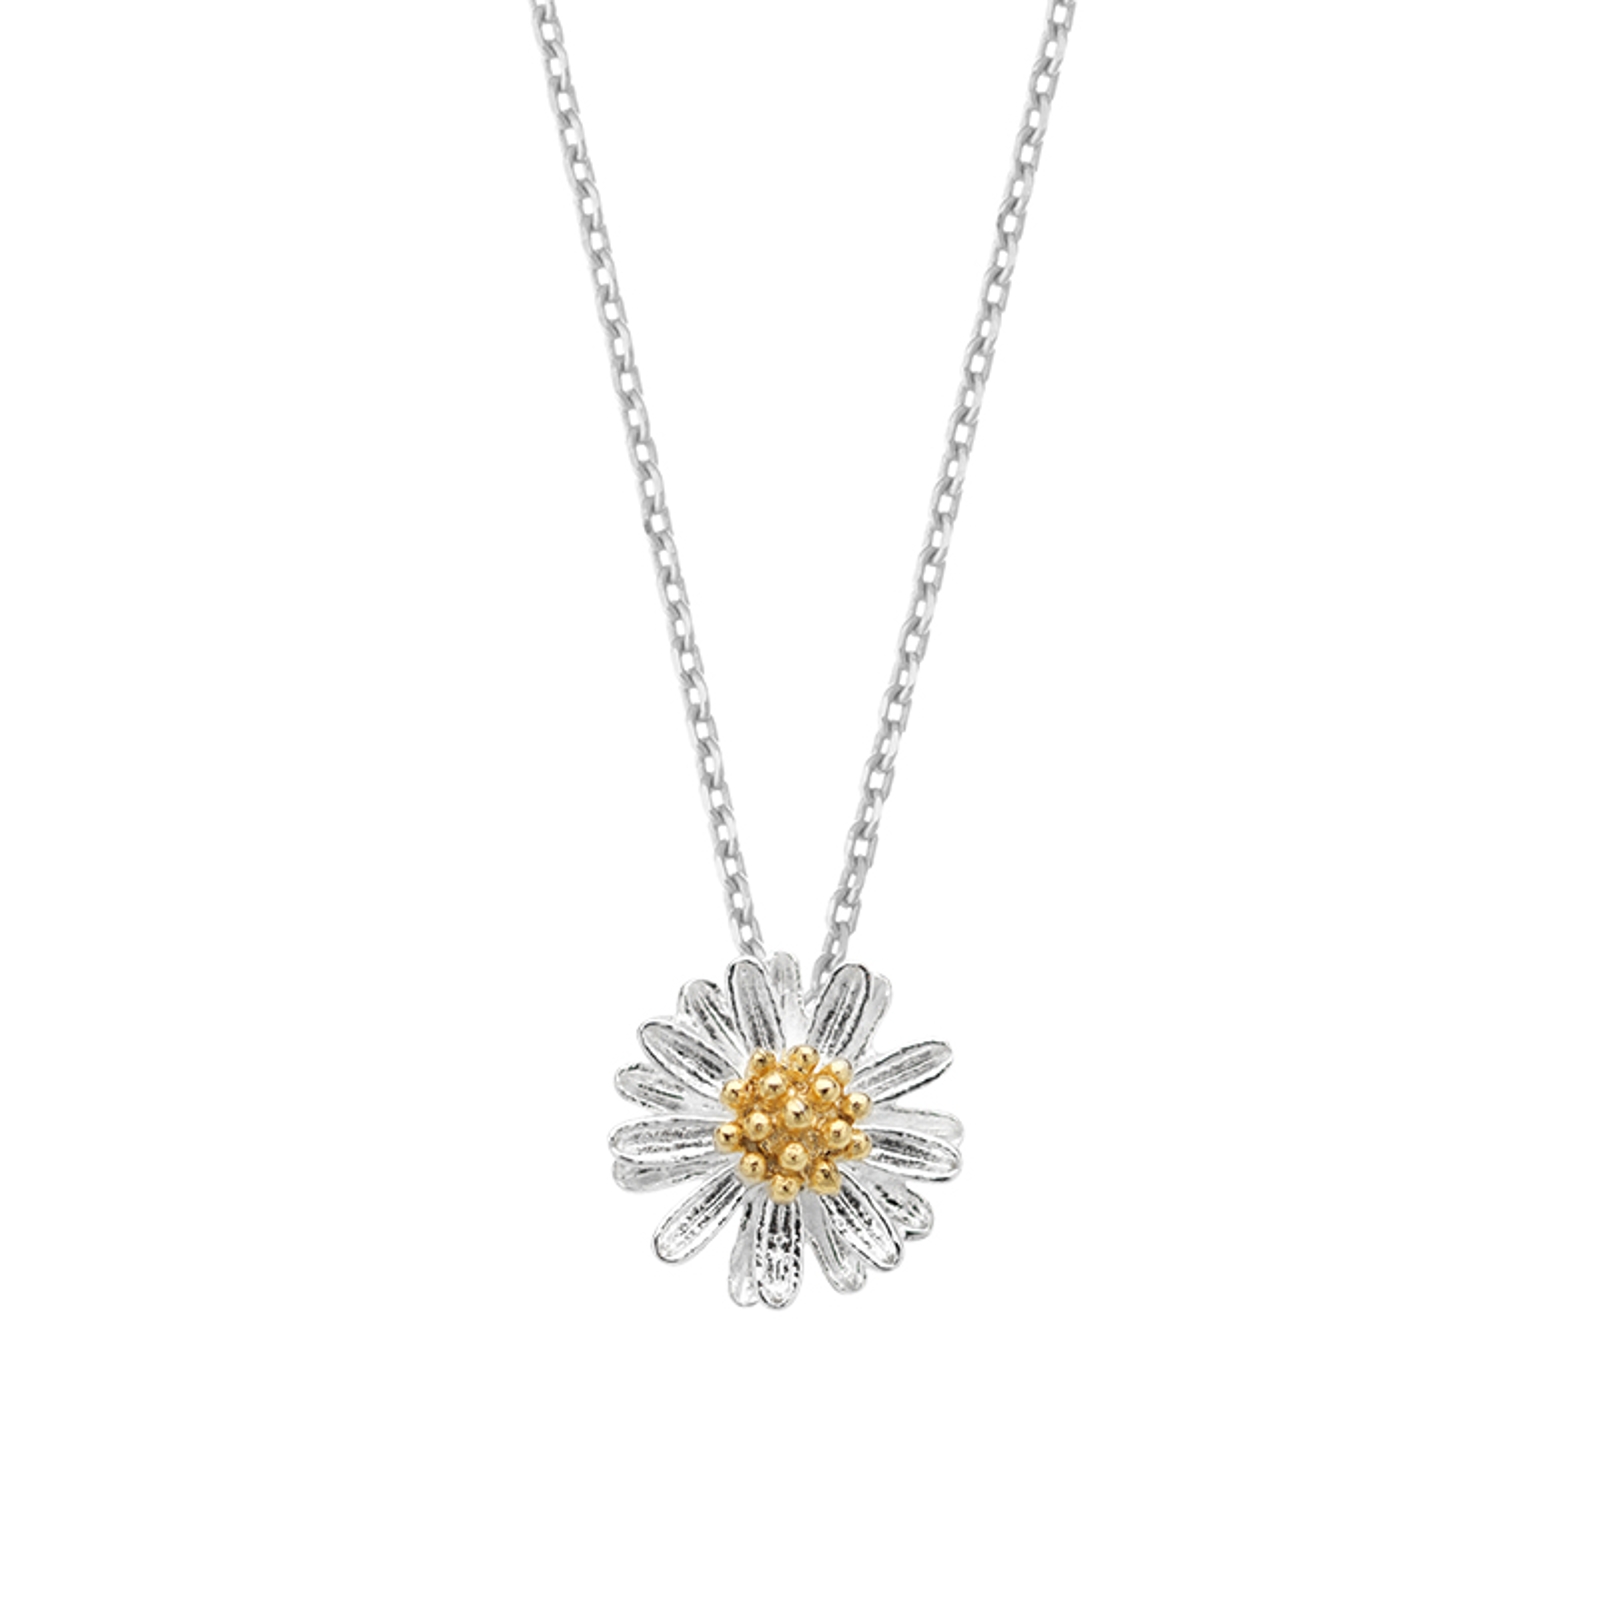 Necklace - With Gold & Silver Wildflower - zestgifts